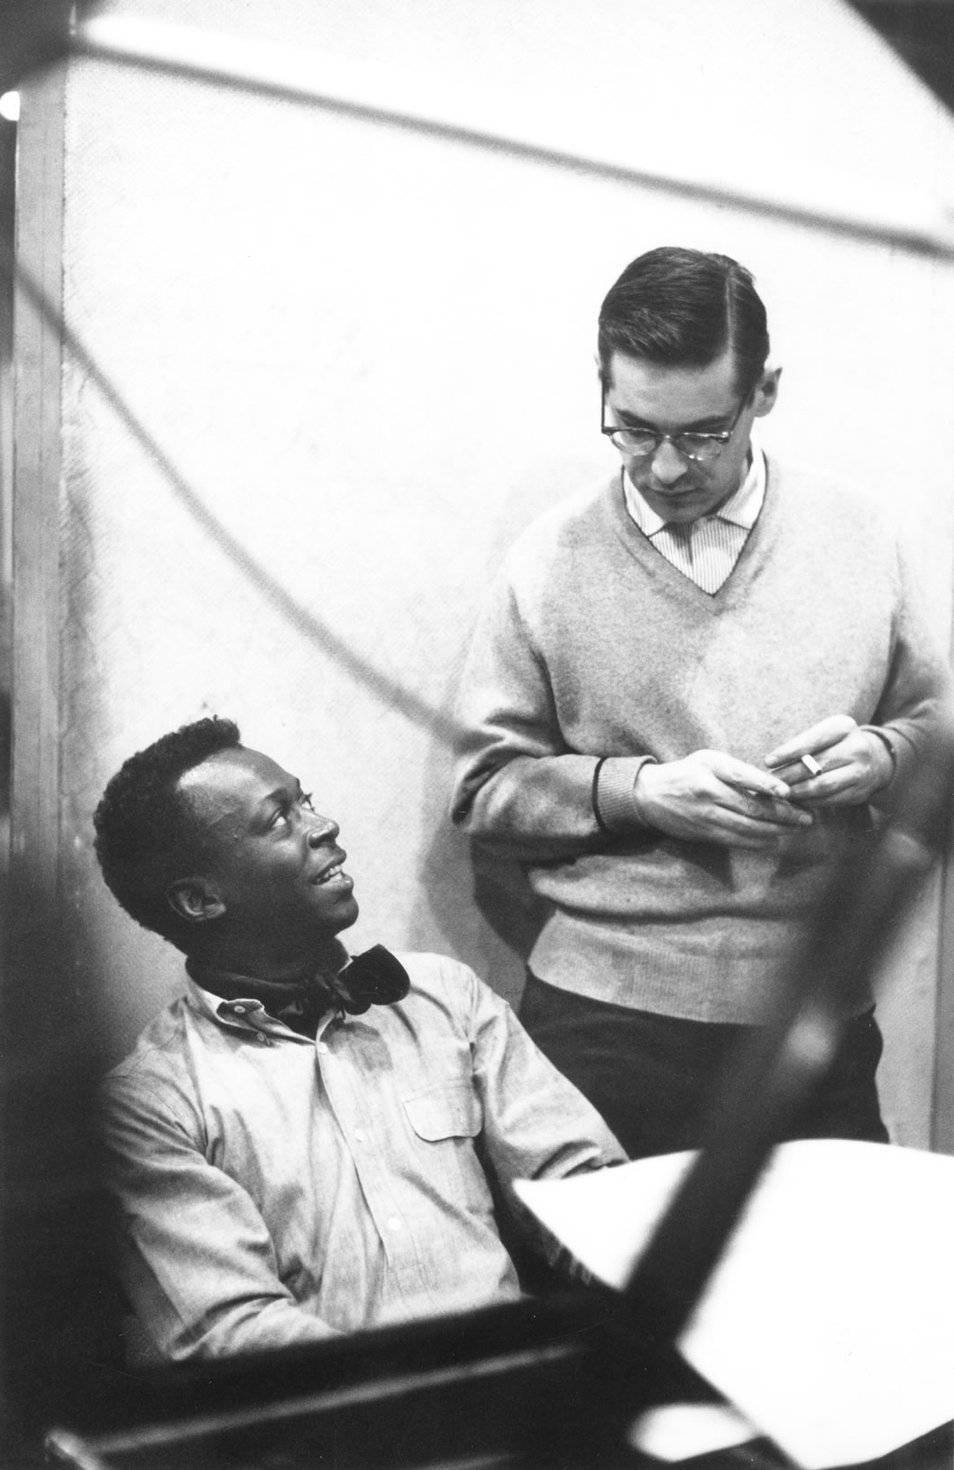 Milesdavis Och Bill Evans - (this Could Be A Possible Computer Or Mobile Wallpaper Theme That Showcases Both Jazz Legends) Wallpaper